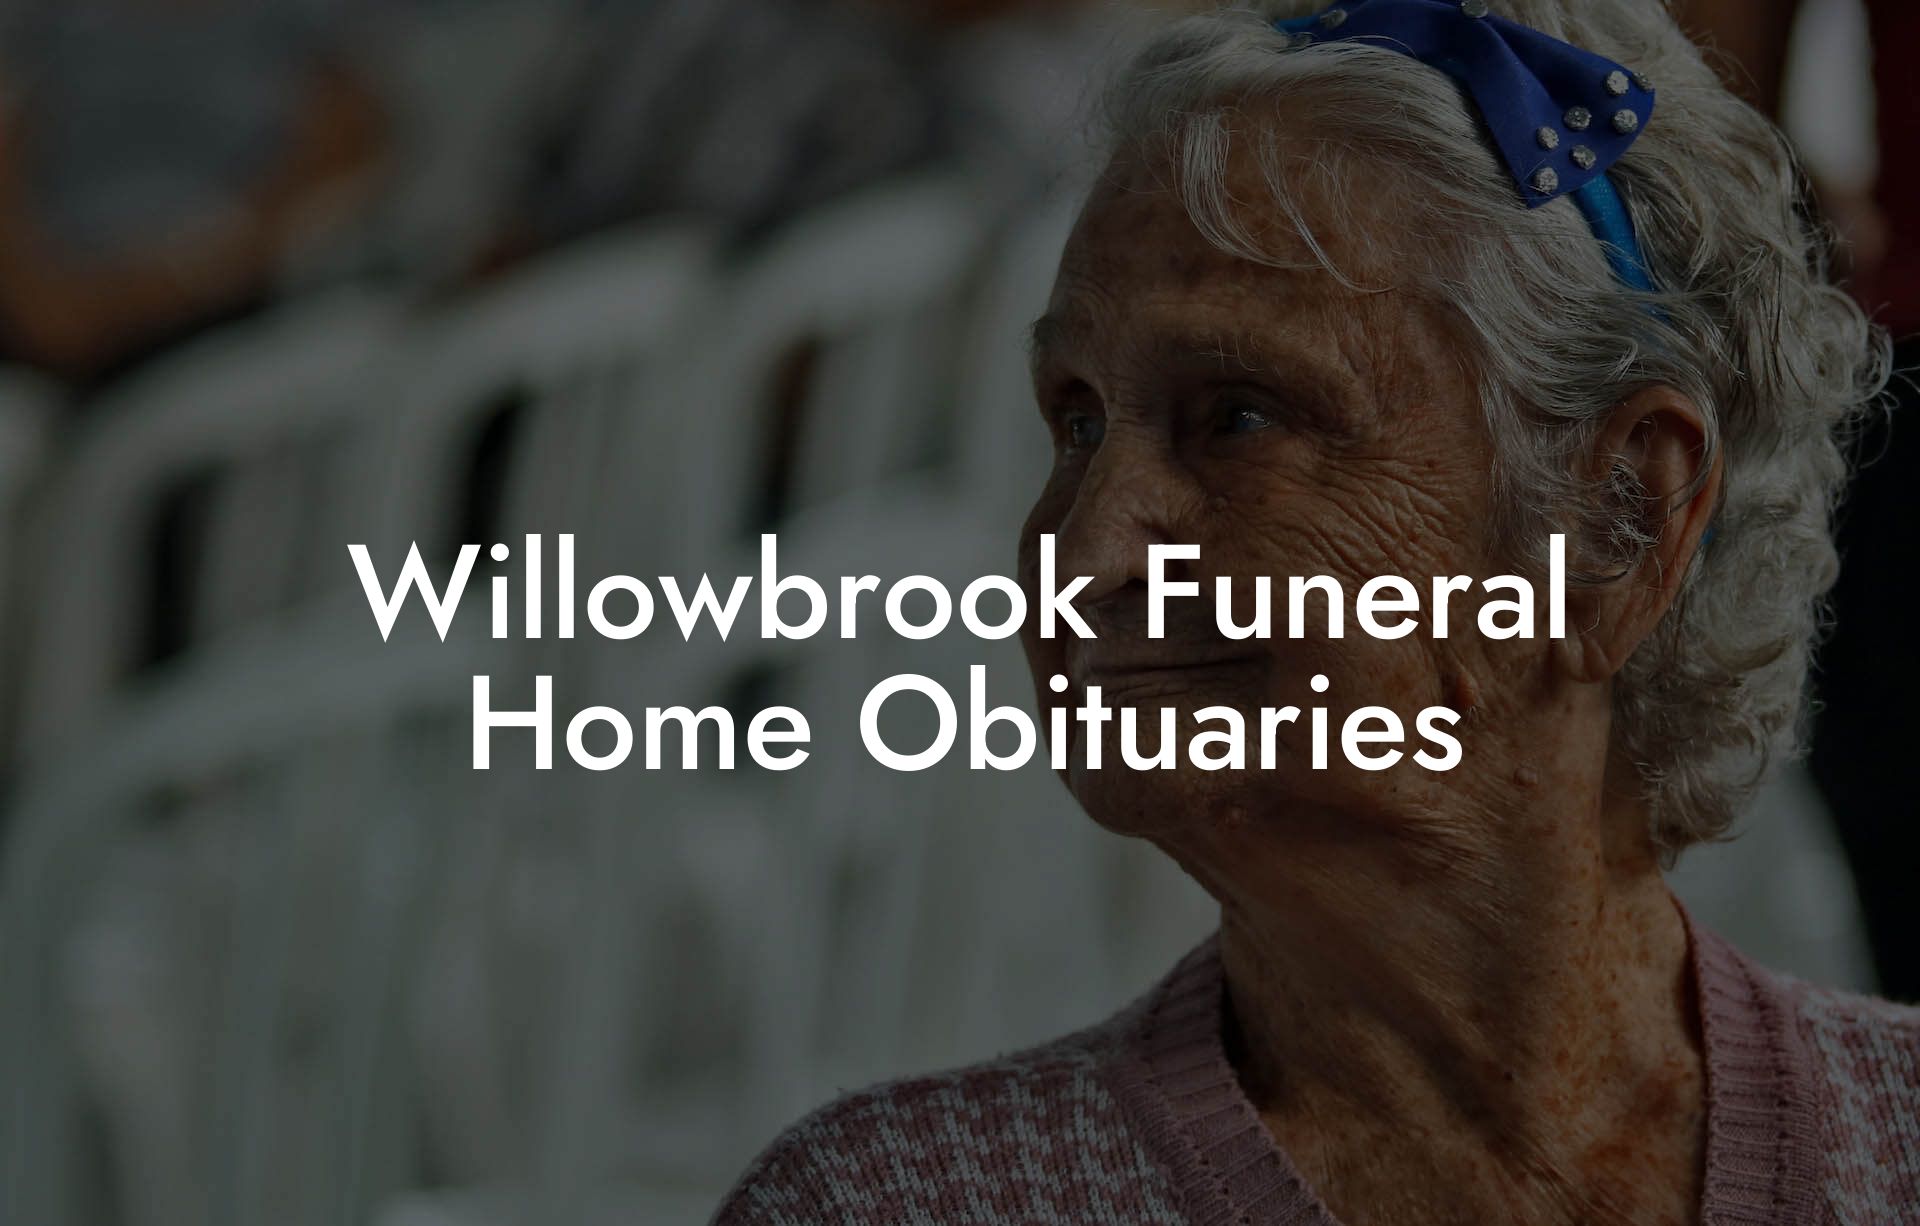 Willowbrook Funeral Home Obituaries